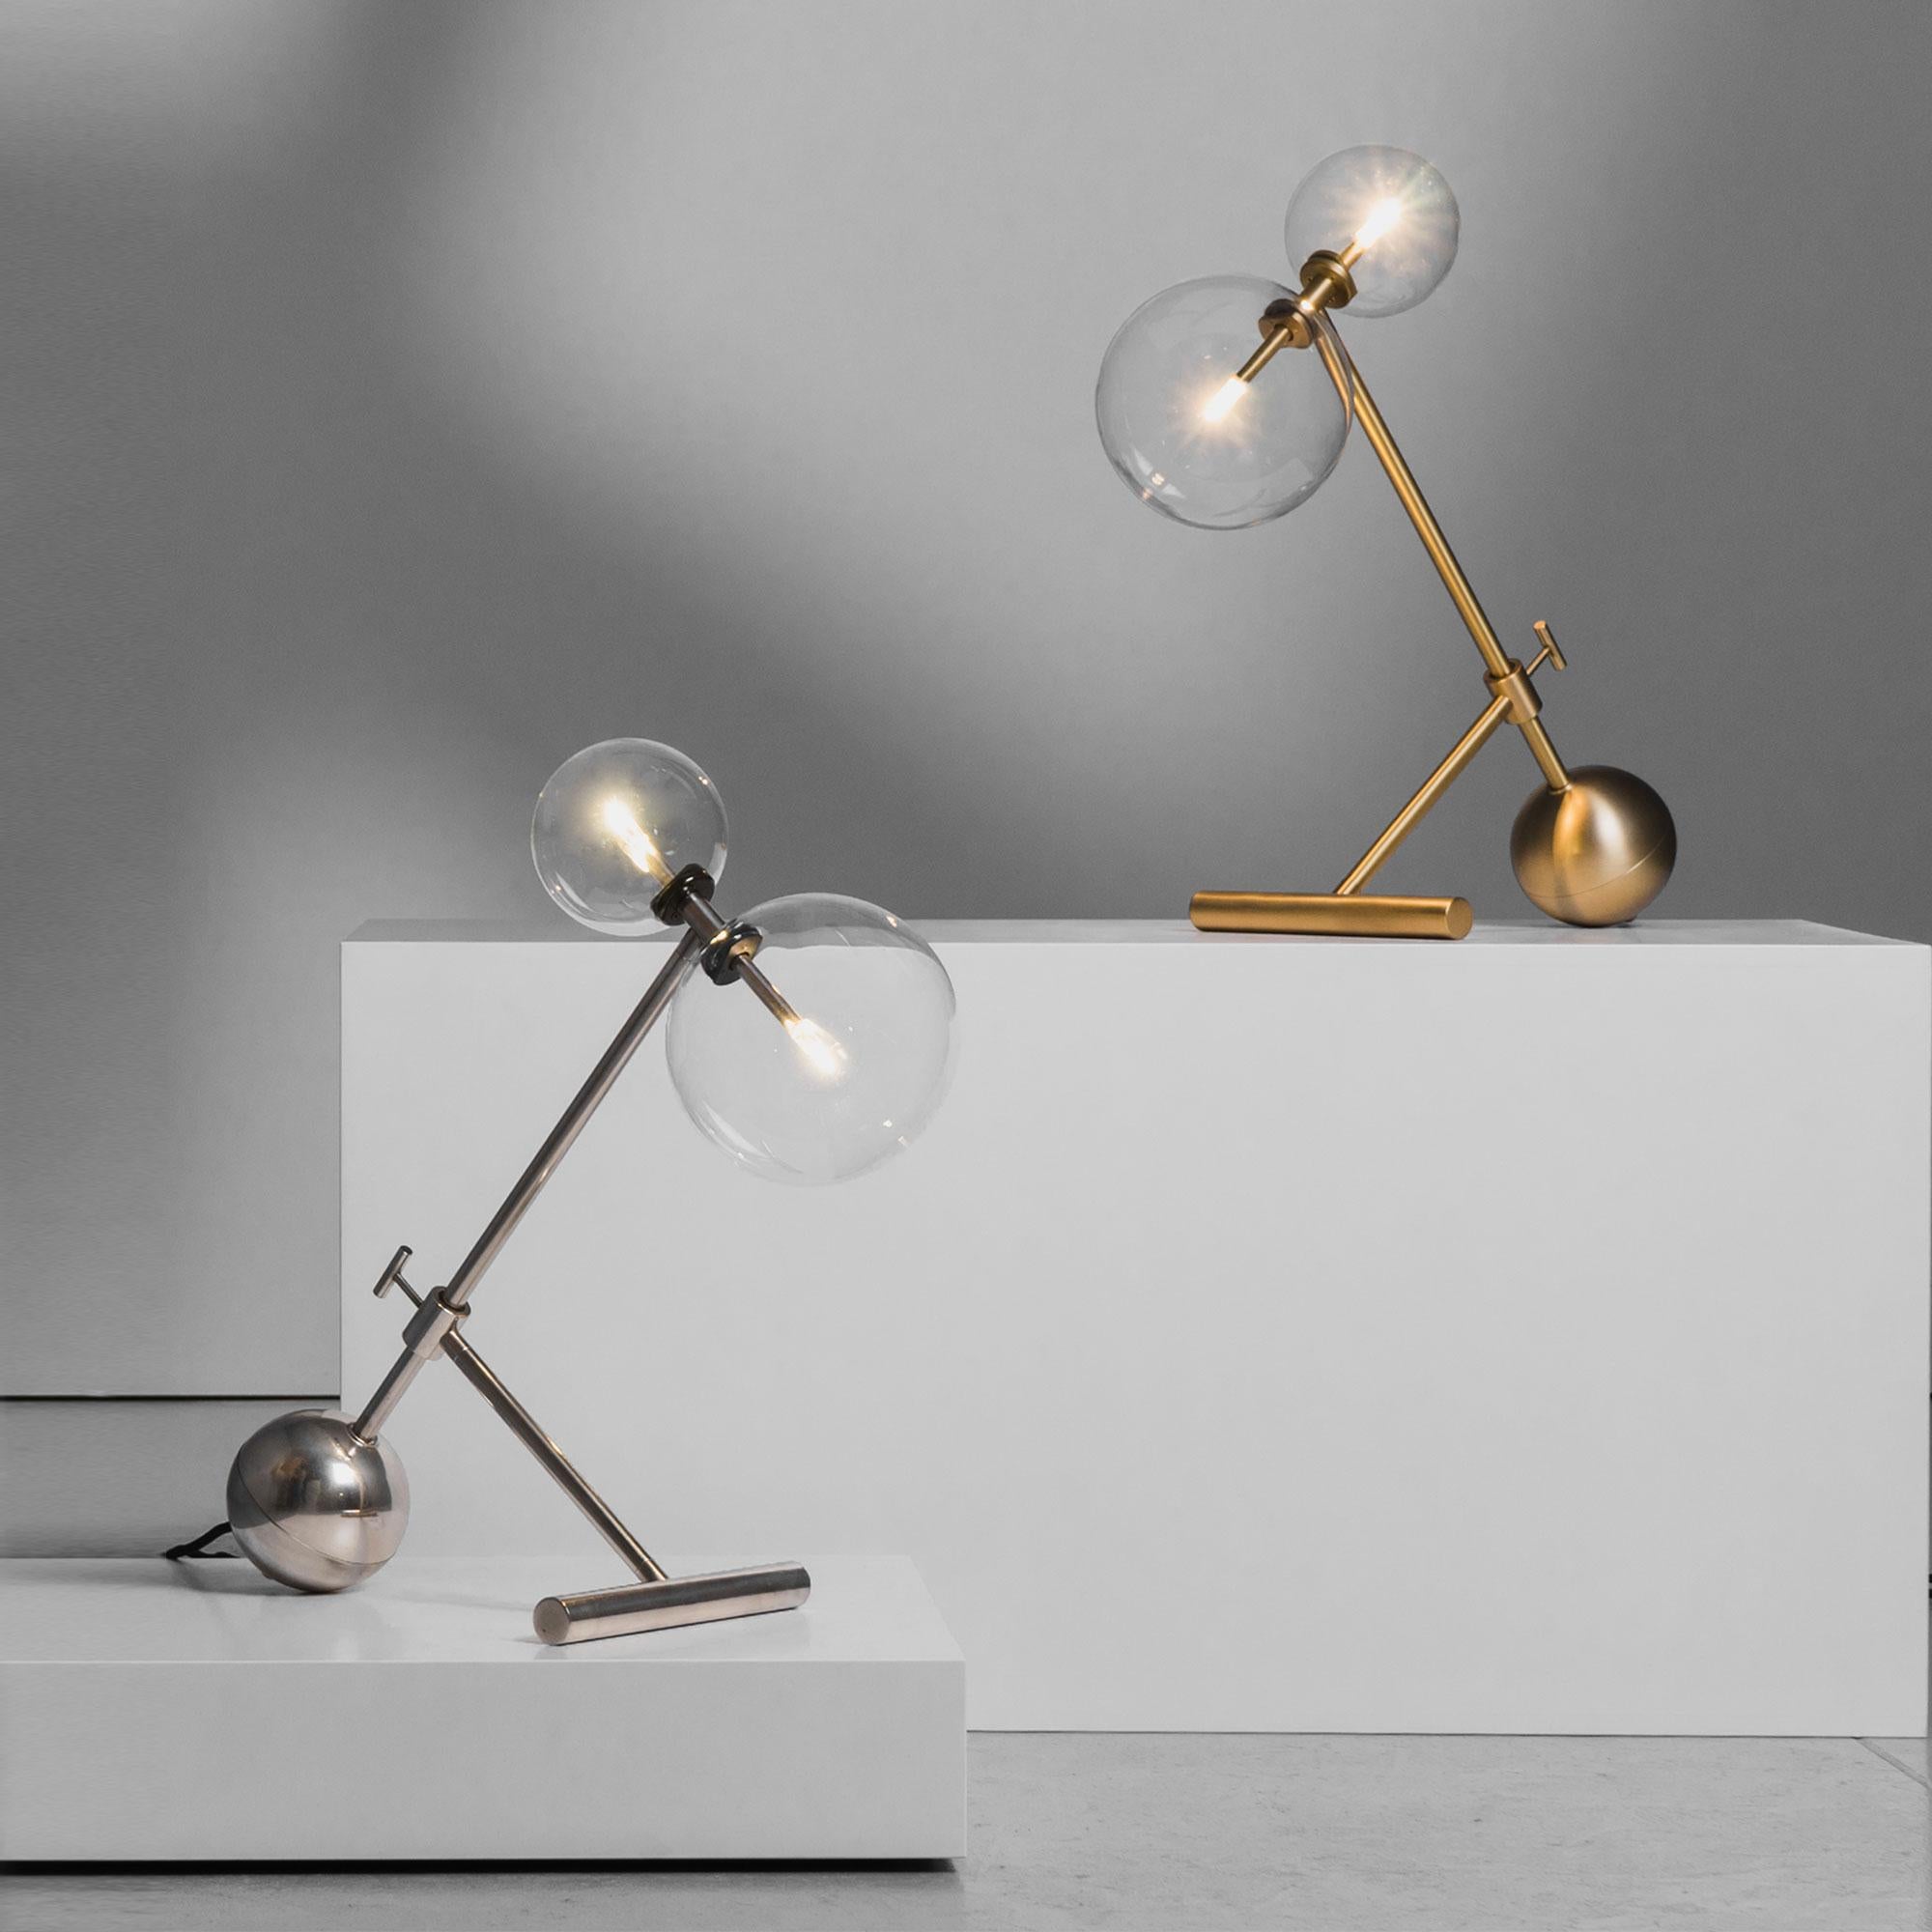 With a clear suggestive illumination, the Zosia table lamp elevates twin points of light upon thin rods, suspended within orbs of glass. A dynamic counterplay of weight and airiness, with the clean and stylish line of Mid-century Italian design. Two